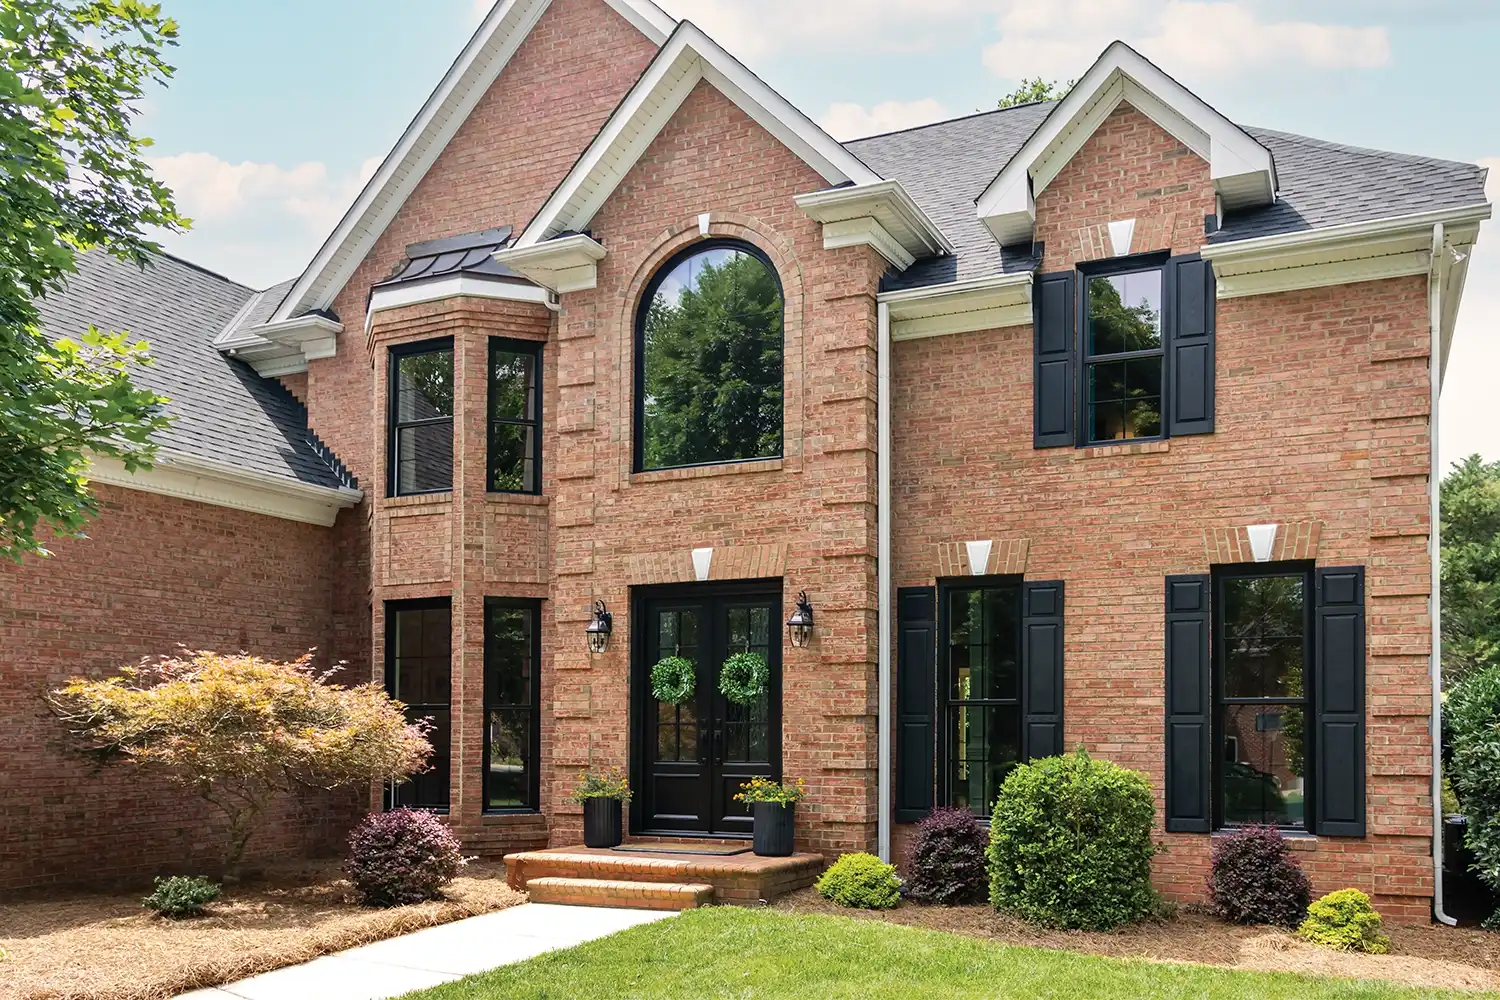 Exterior view of a brick home with black windows and black shutters.